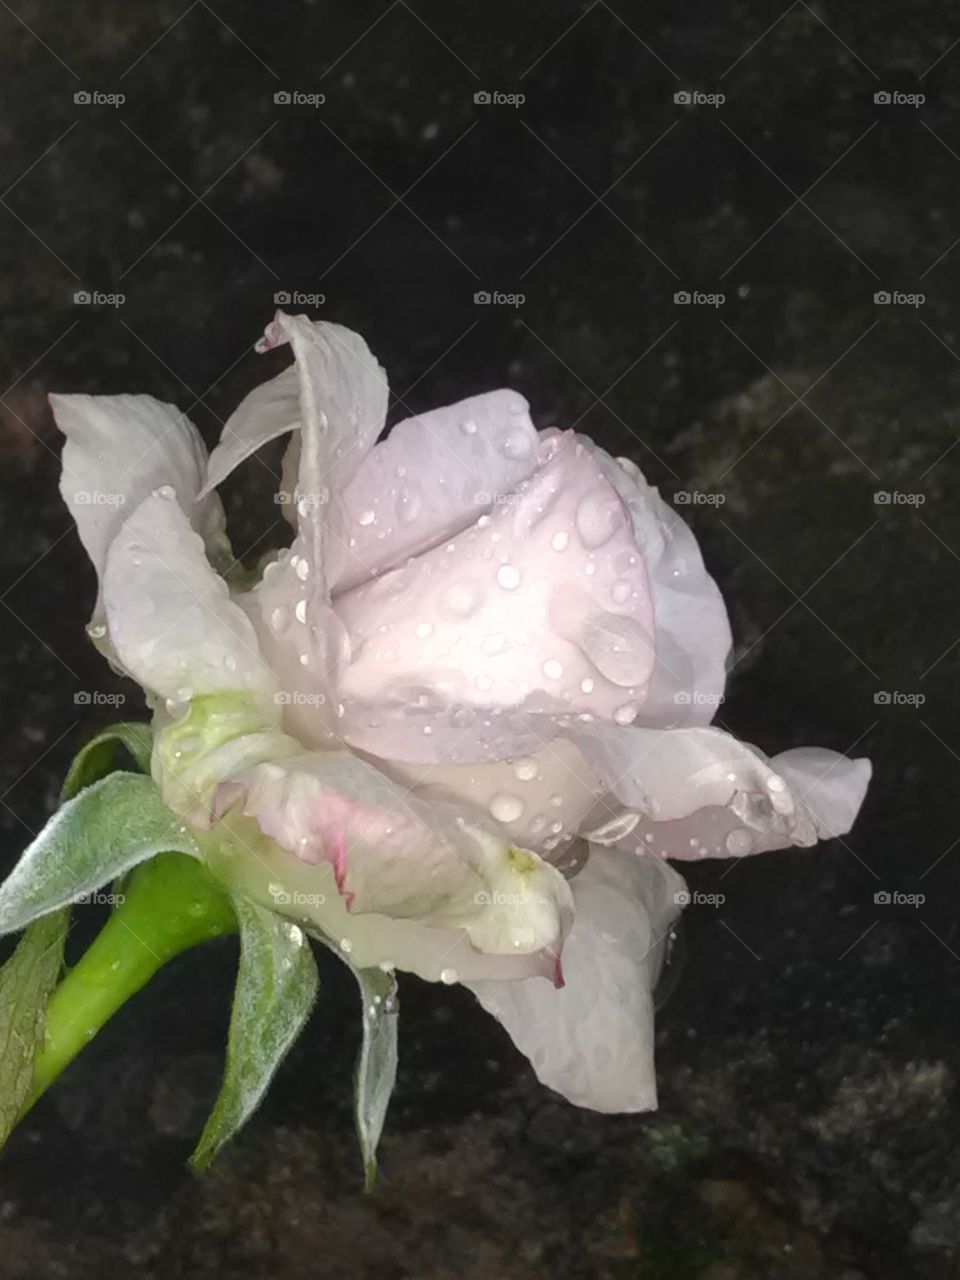 This is a very beautiful flower white roses on the waters drops.